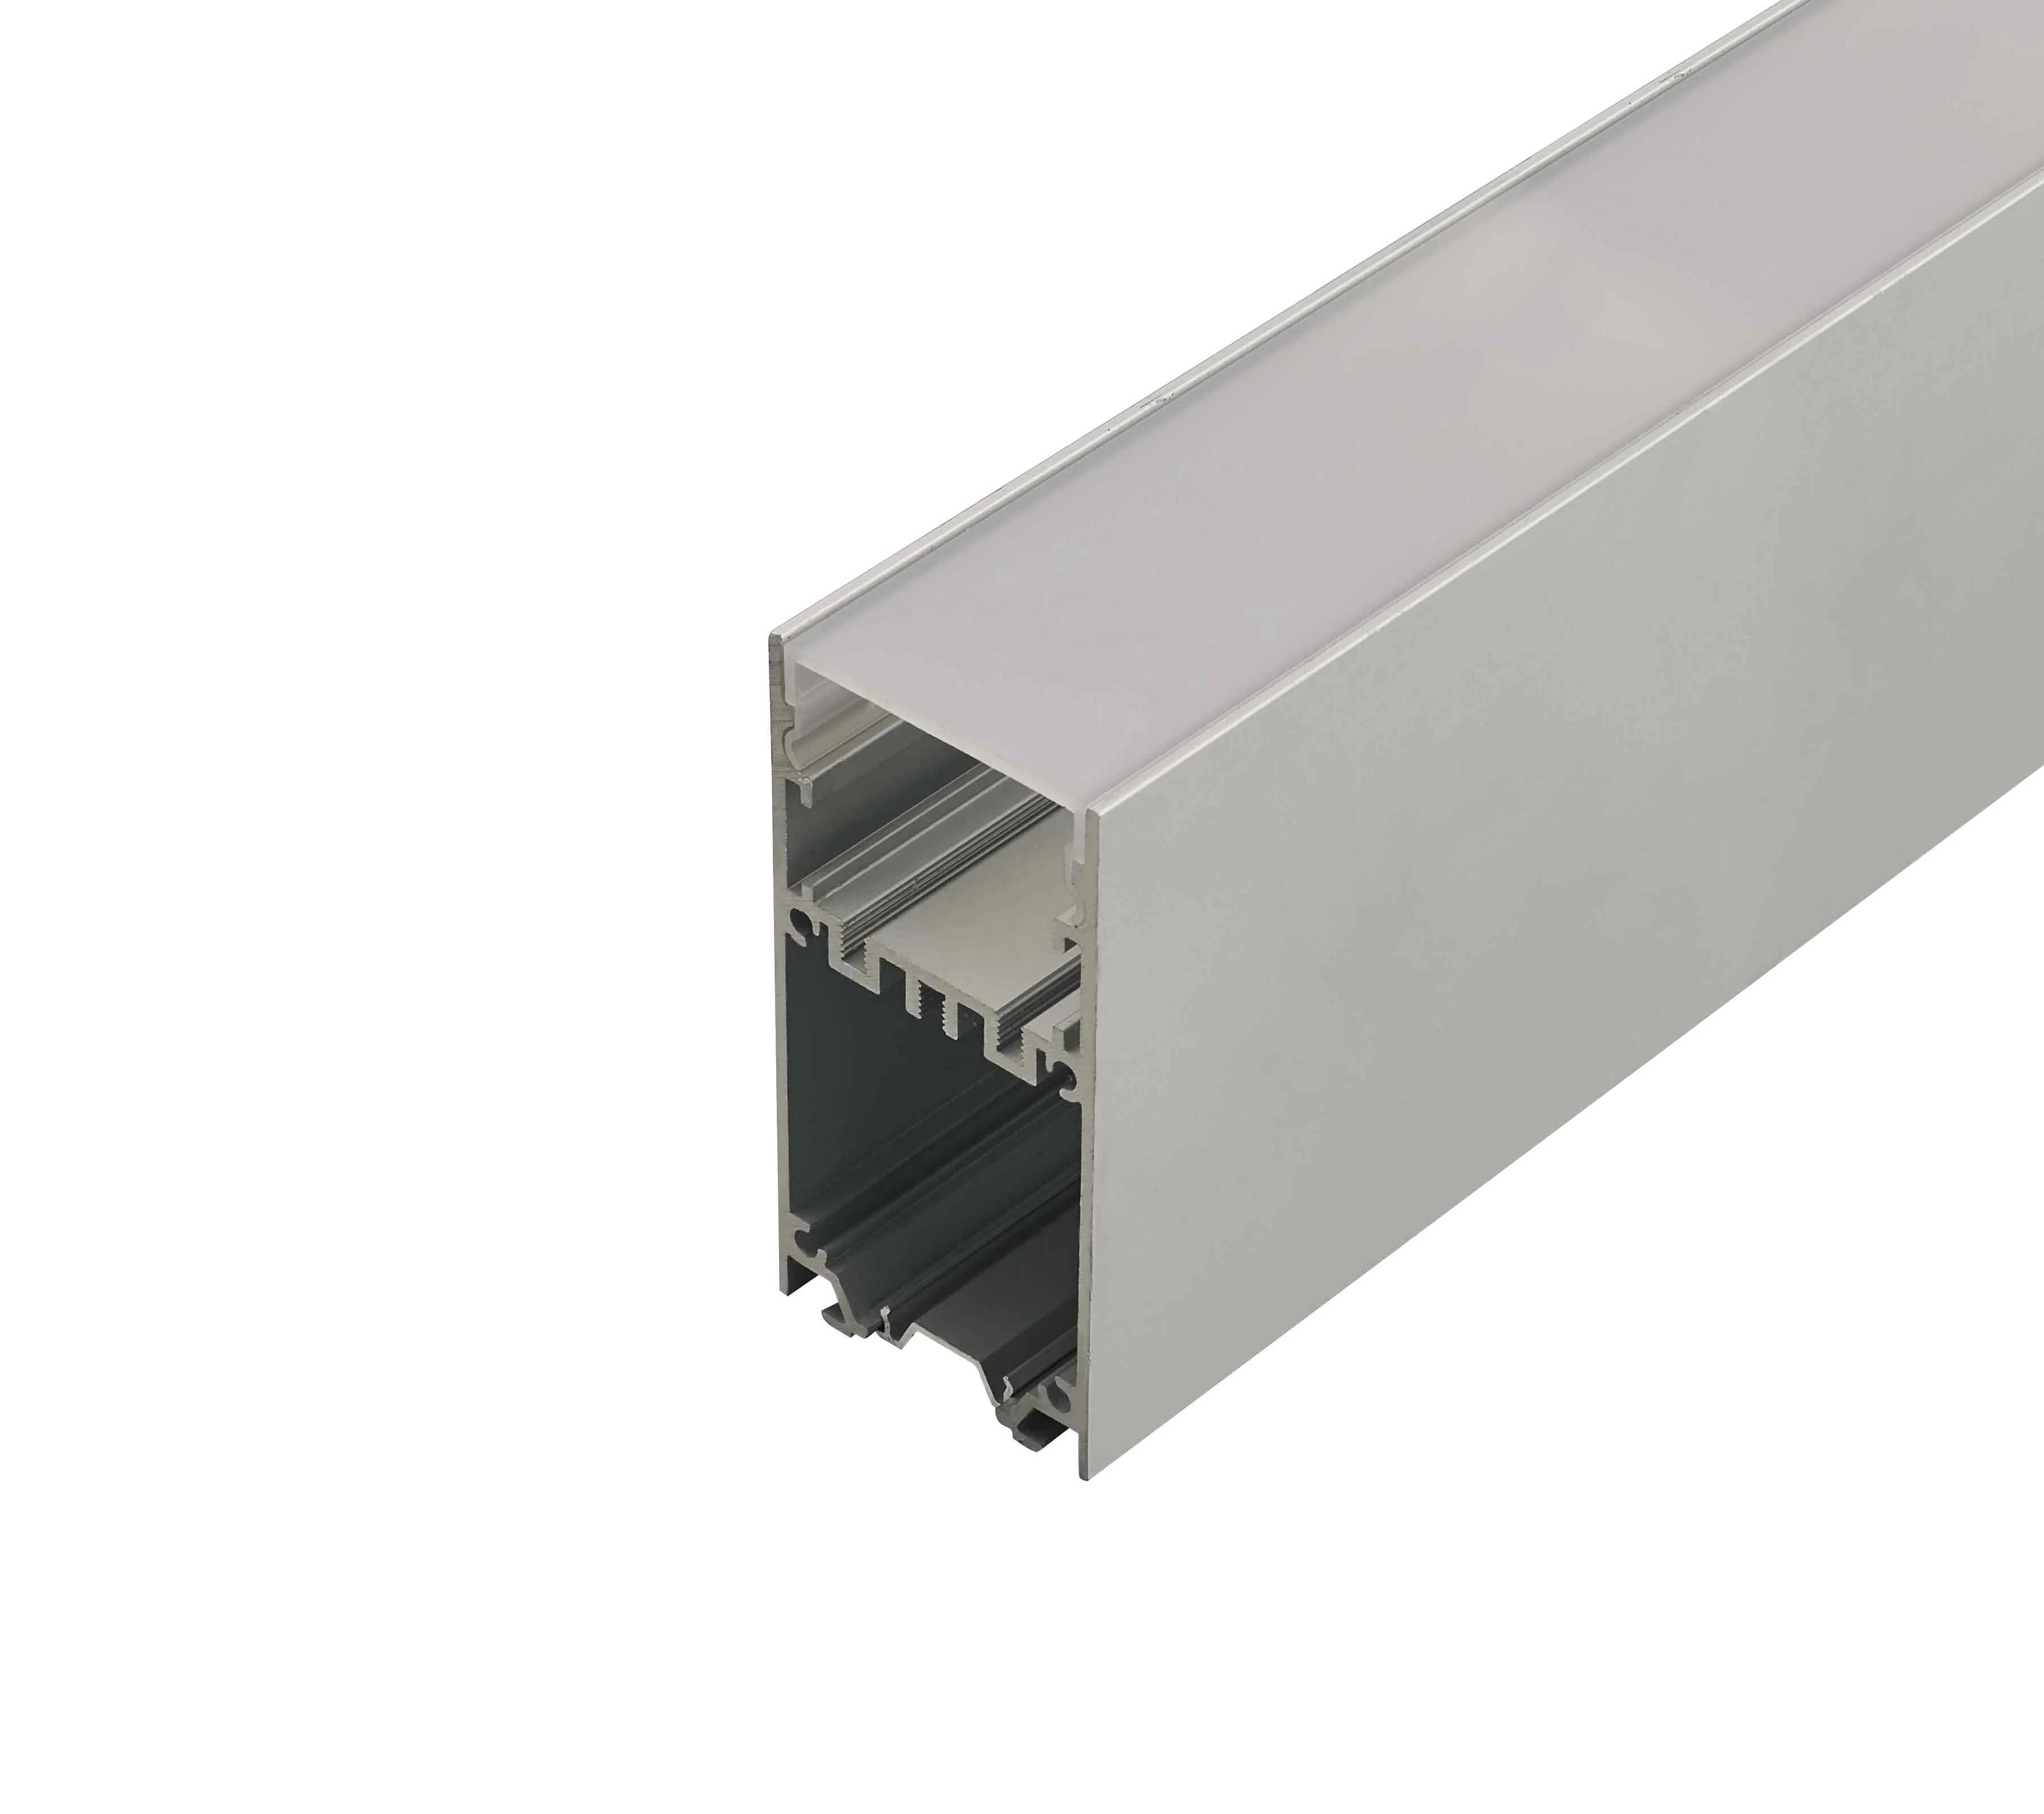 KXZM Led Light Bar Extrusion Channel For led Strips